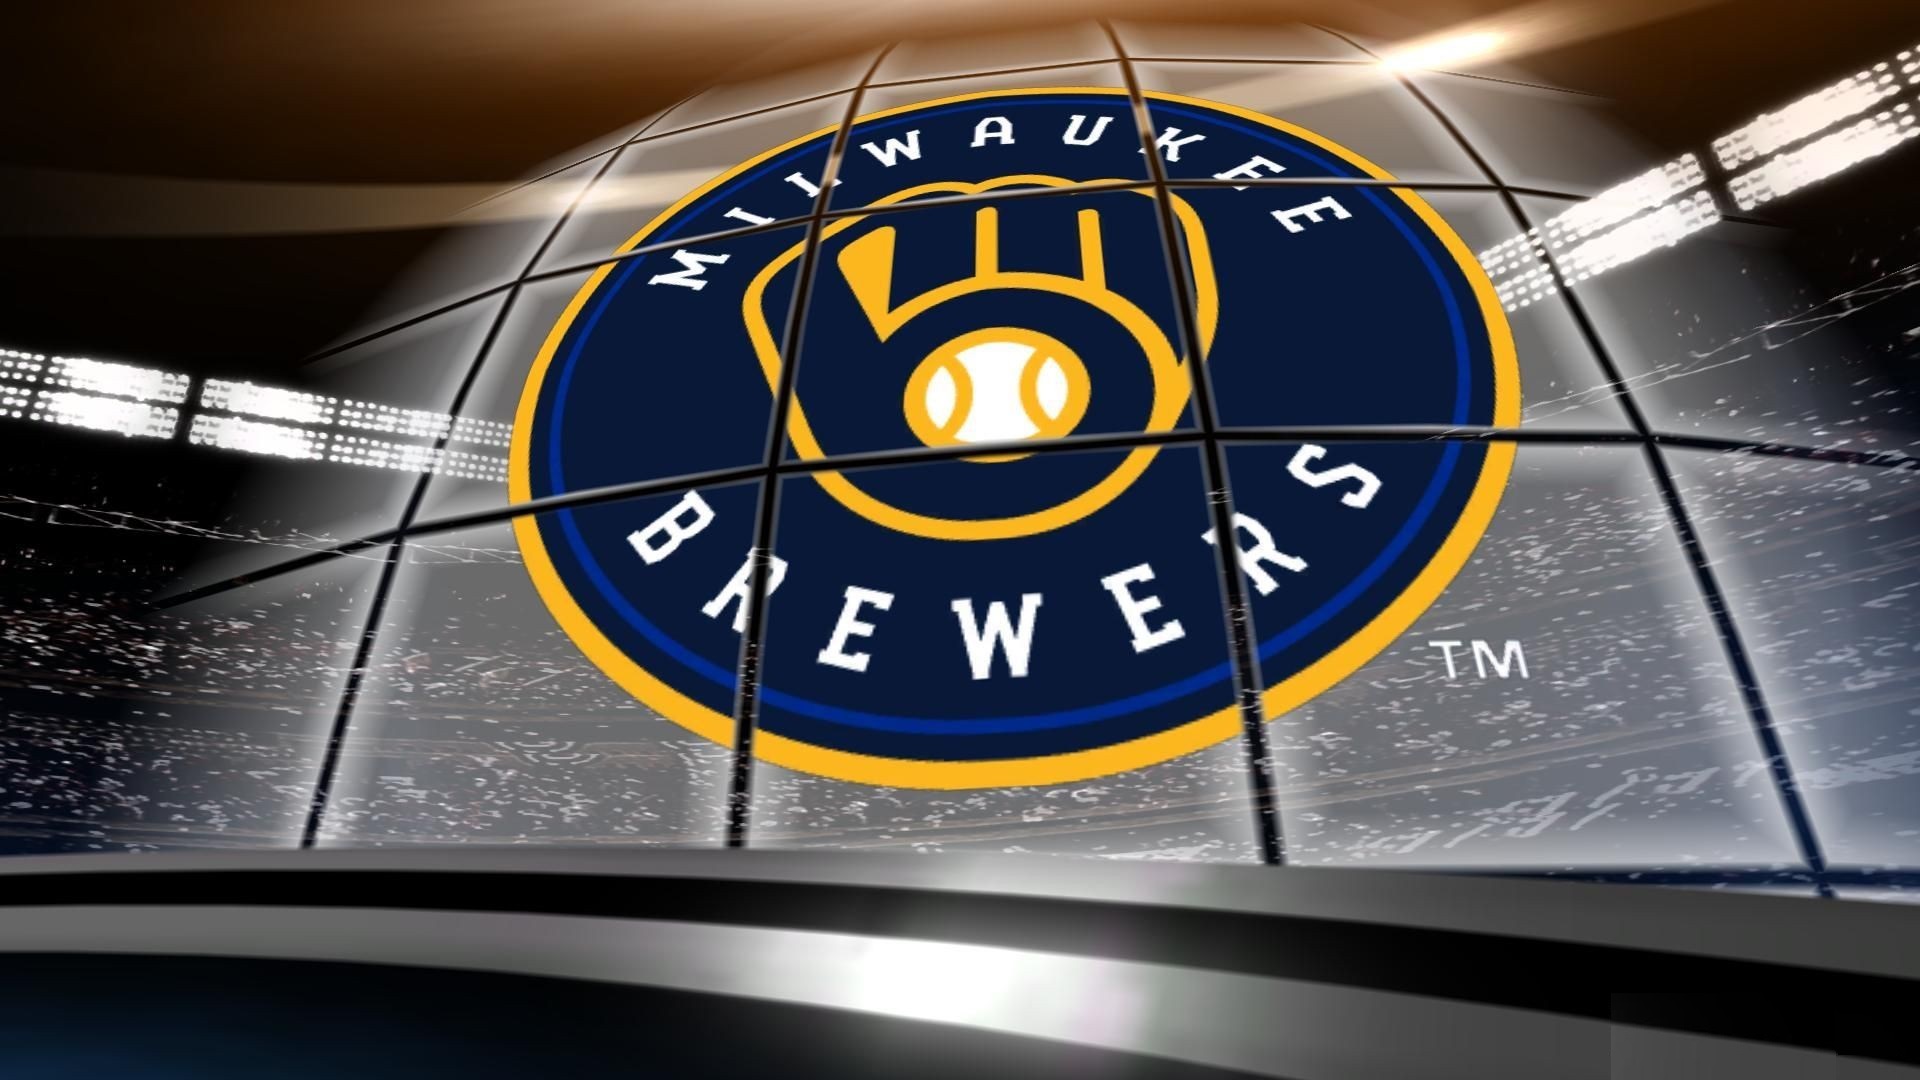 Wallpaper Desktop Milwaukee Brewers HD with high-resolution 1920x1080 pixel. You can use this wallpaper for Mac Desktop Wallpaper, Laptop Screensavers, Android Wallpapers, Tablet or iPhone Home Screen and another mobile phone device